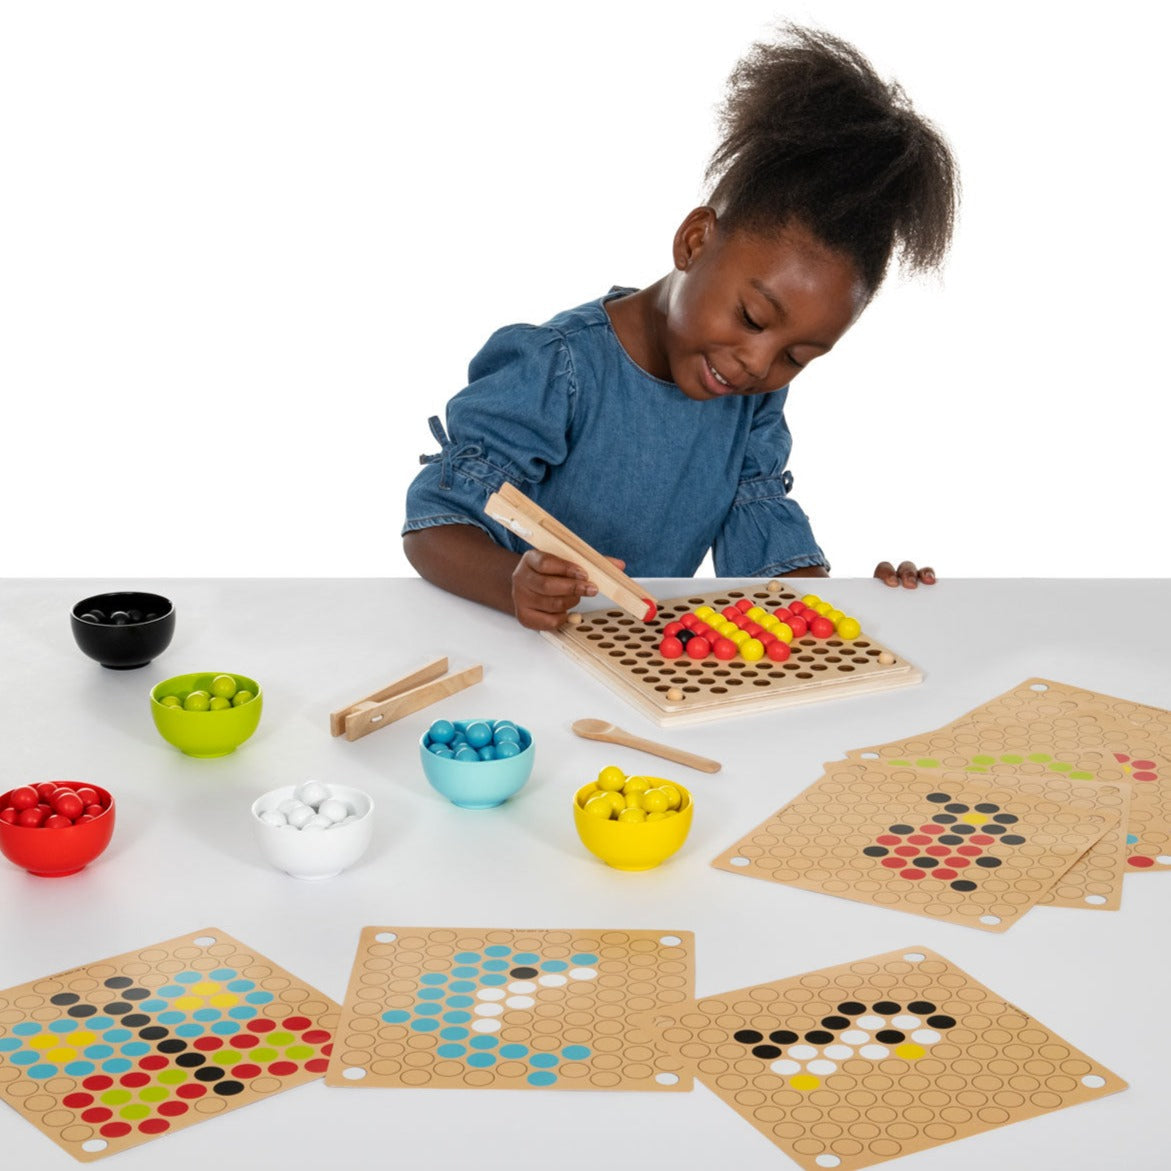 Wooden Fine Motor Pattern Balls, Introducing our fine motor skills development set, perfect for younger children who are just starting to learn about colours, patterns and cognitive development. This set includes everything your child needs to explore their creativity and improve their fine motor skills. Featuring 10 double-sided workcards with a range of patterns and designs, children can create pictures that include animals, shapes and many more. The set also includes a baseboard and overlay, 111 balls in